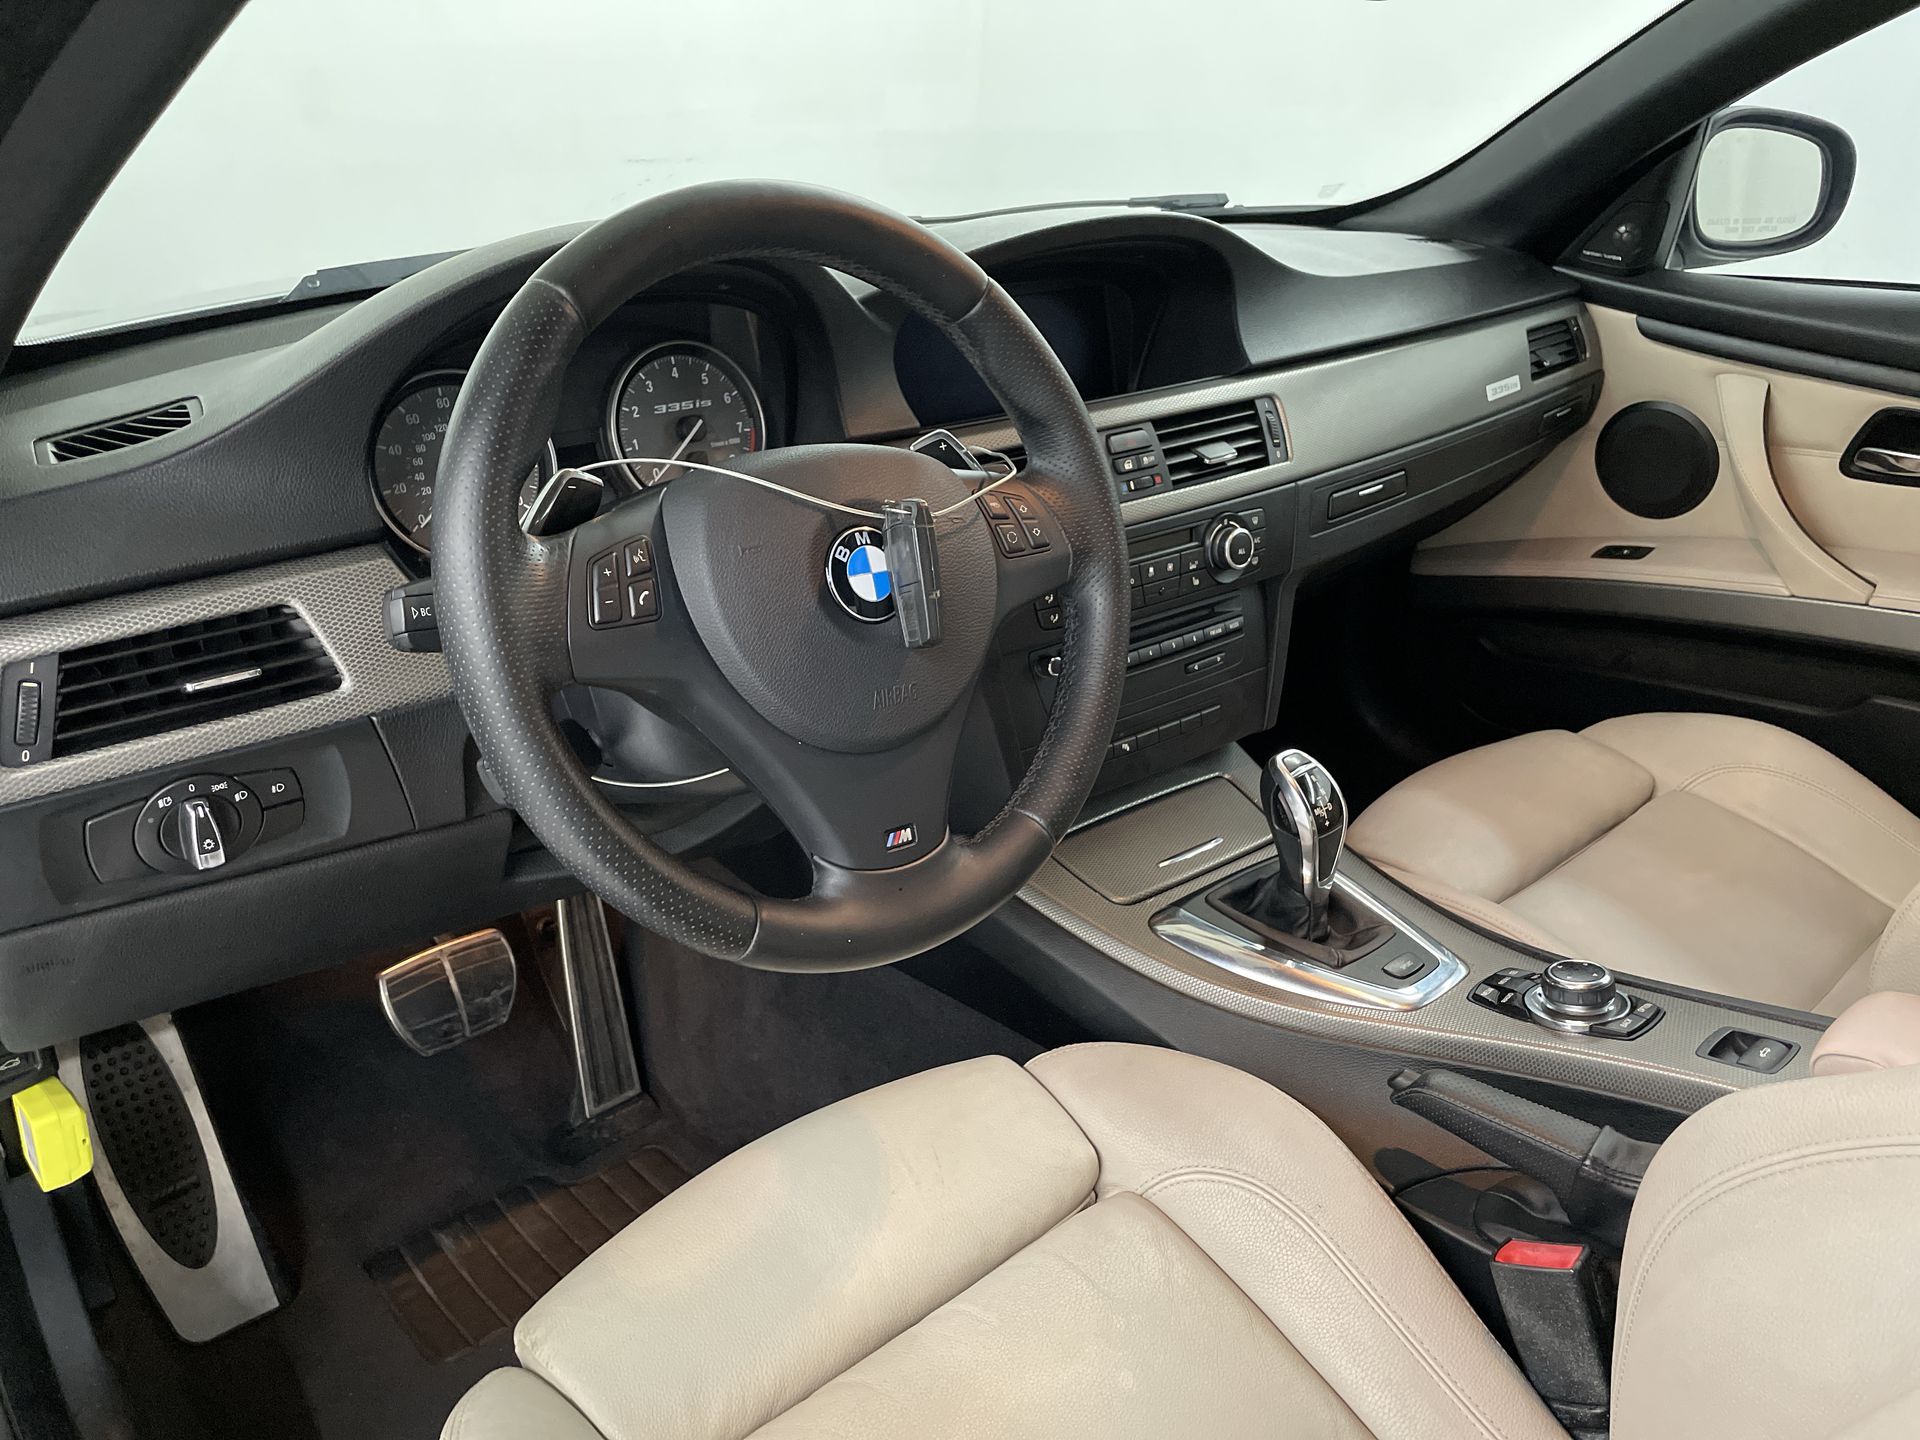 brand name Chip Tariff Used 2013 BMW 3 Series For Sale ($24,499) | Vroom